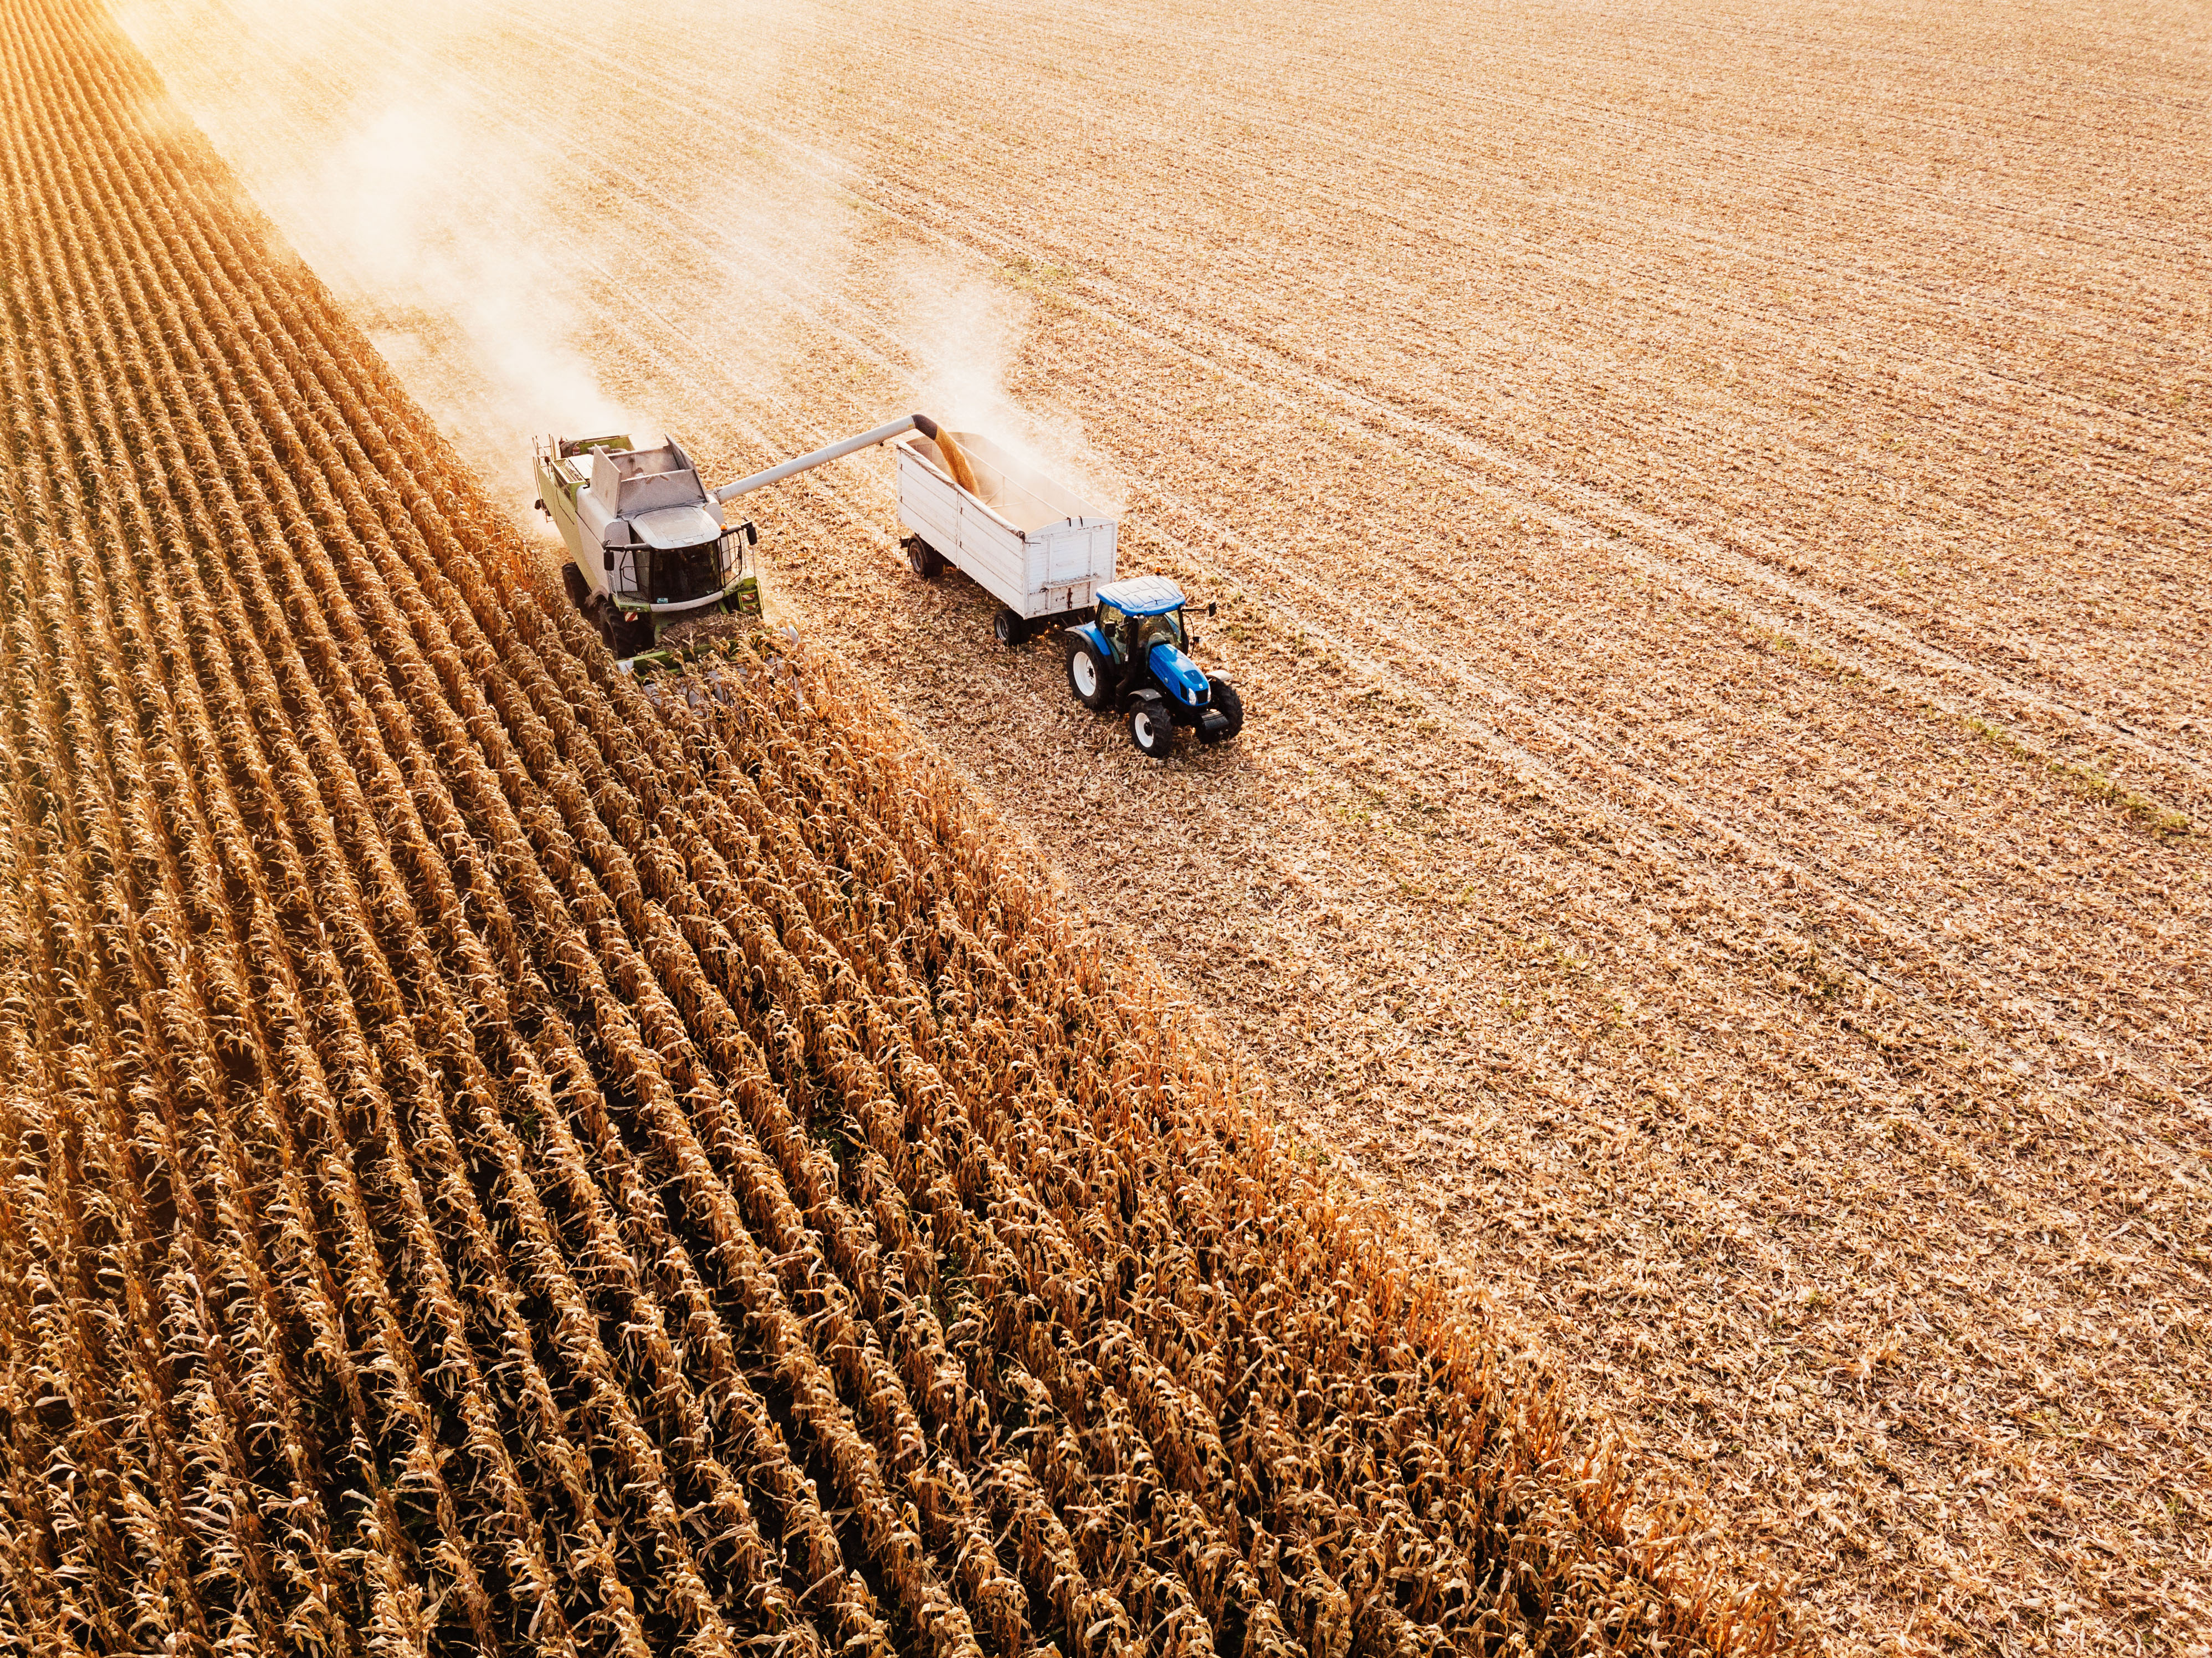 Top 5 harvest safety tips this season